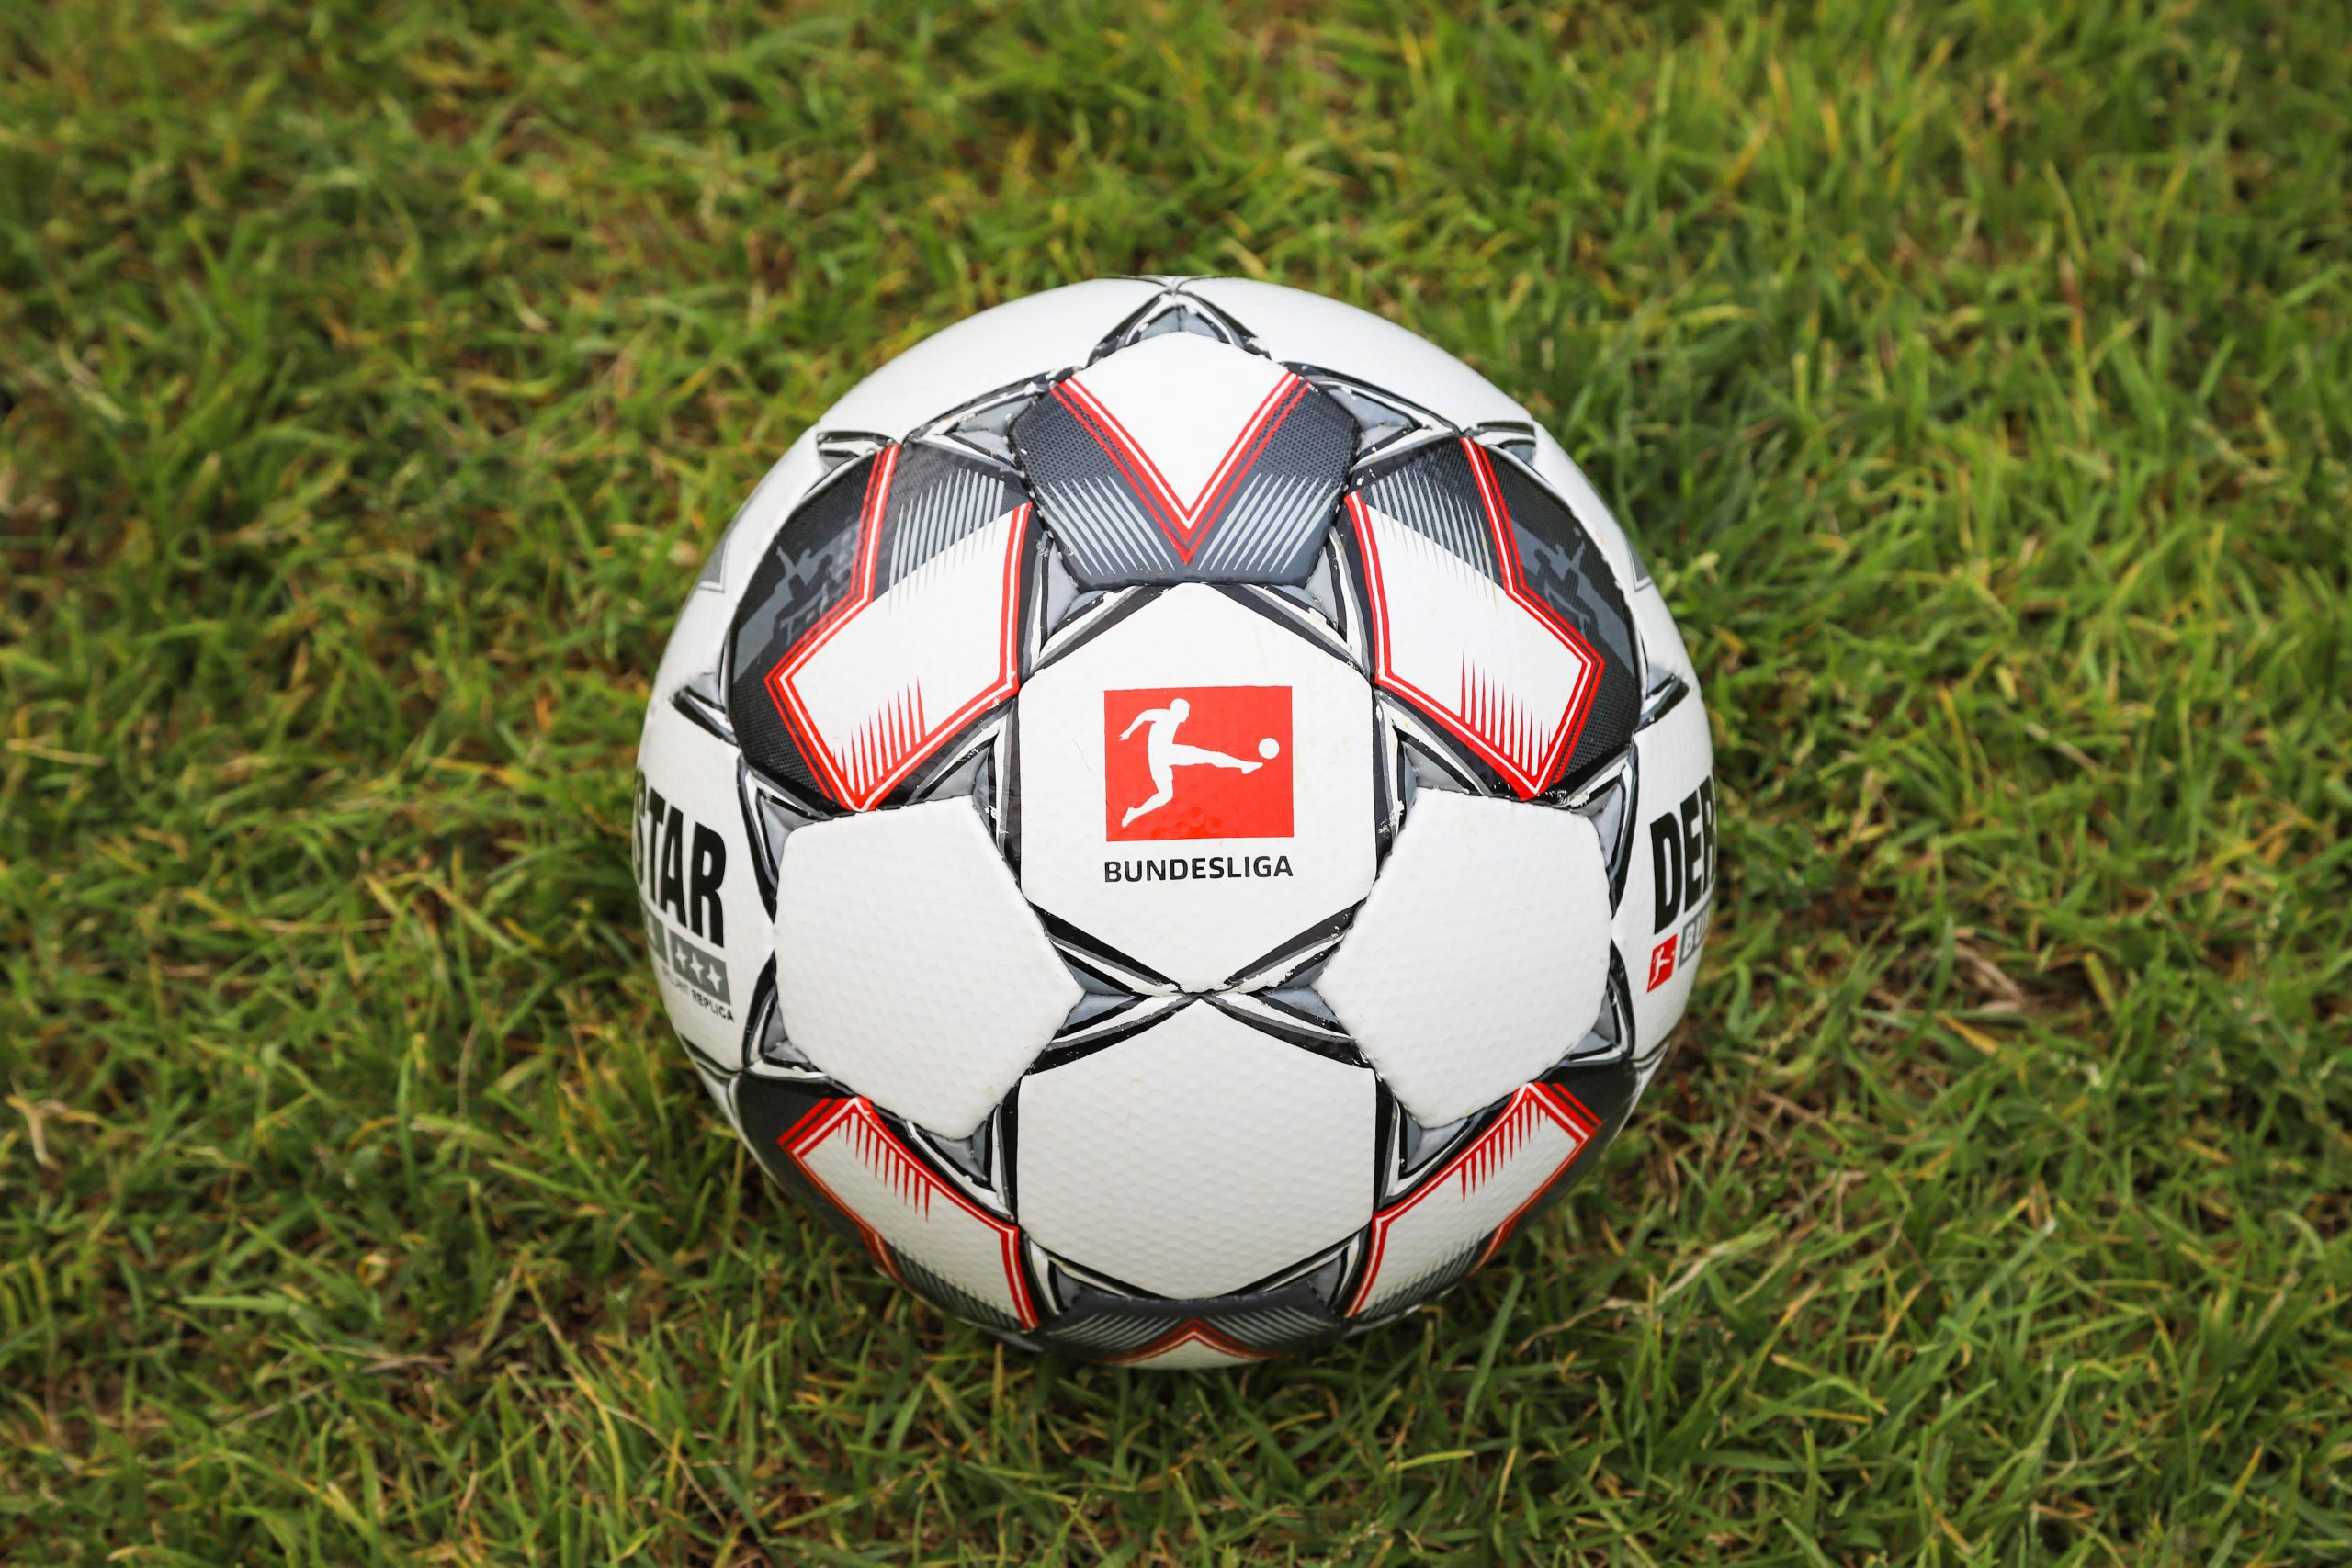 Sorare becomes the official partner of the 1st and 2nd Bundesliga